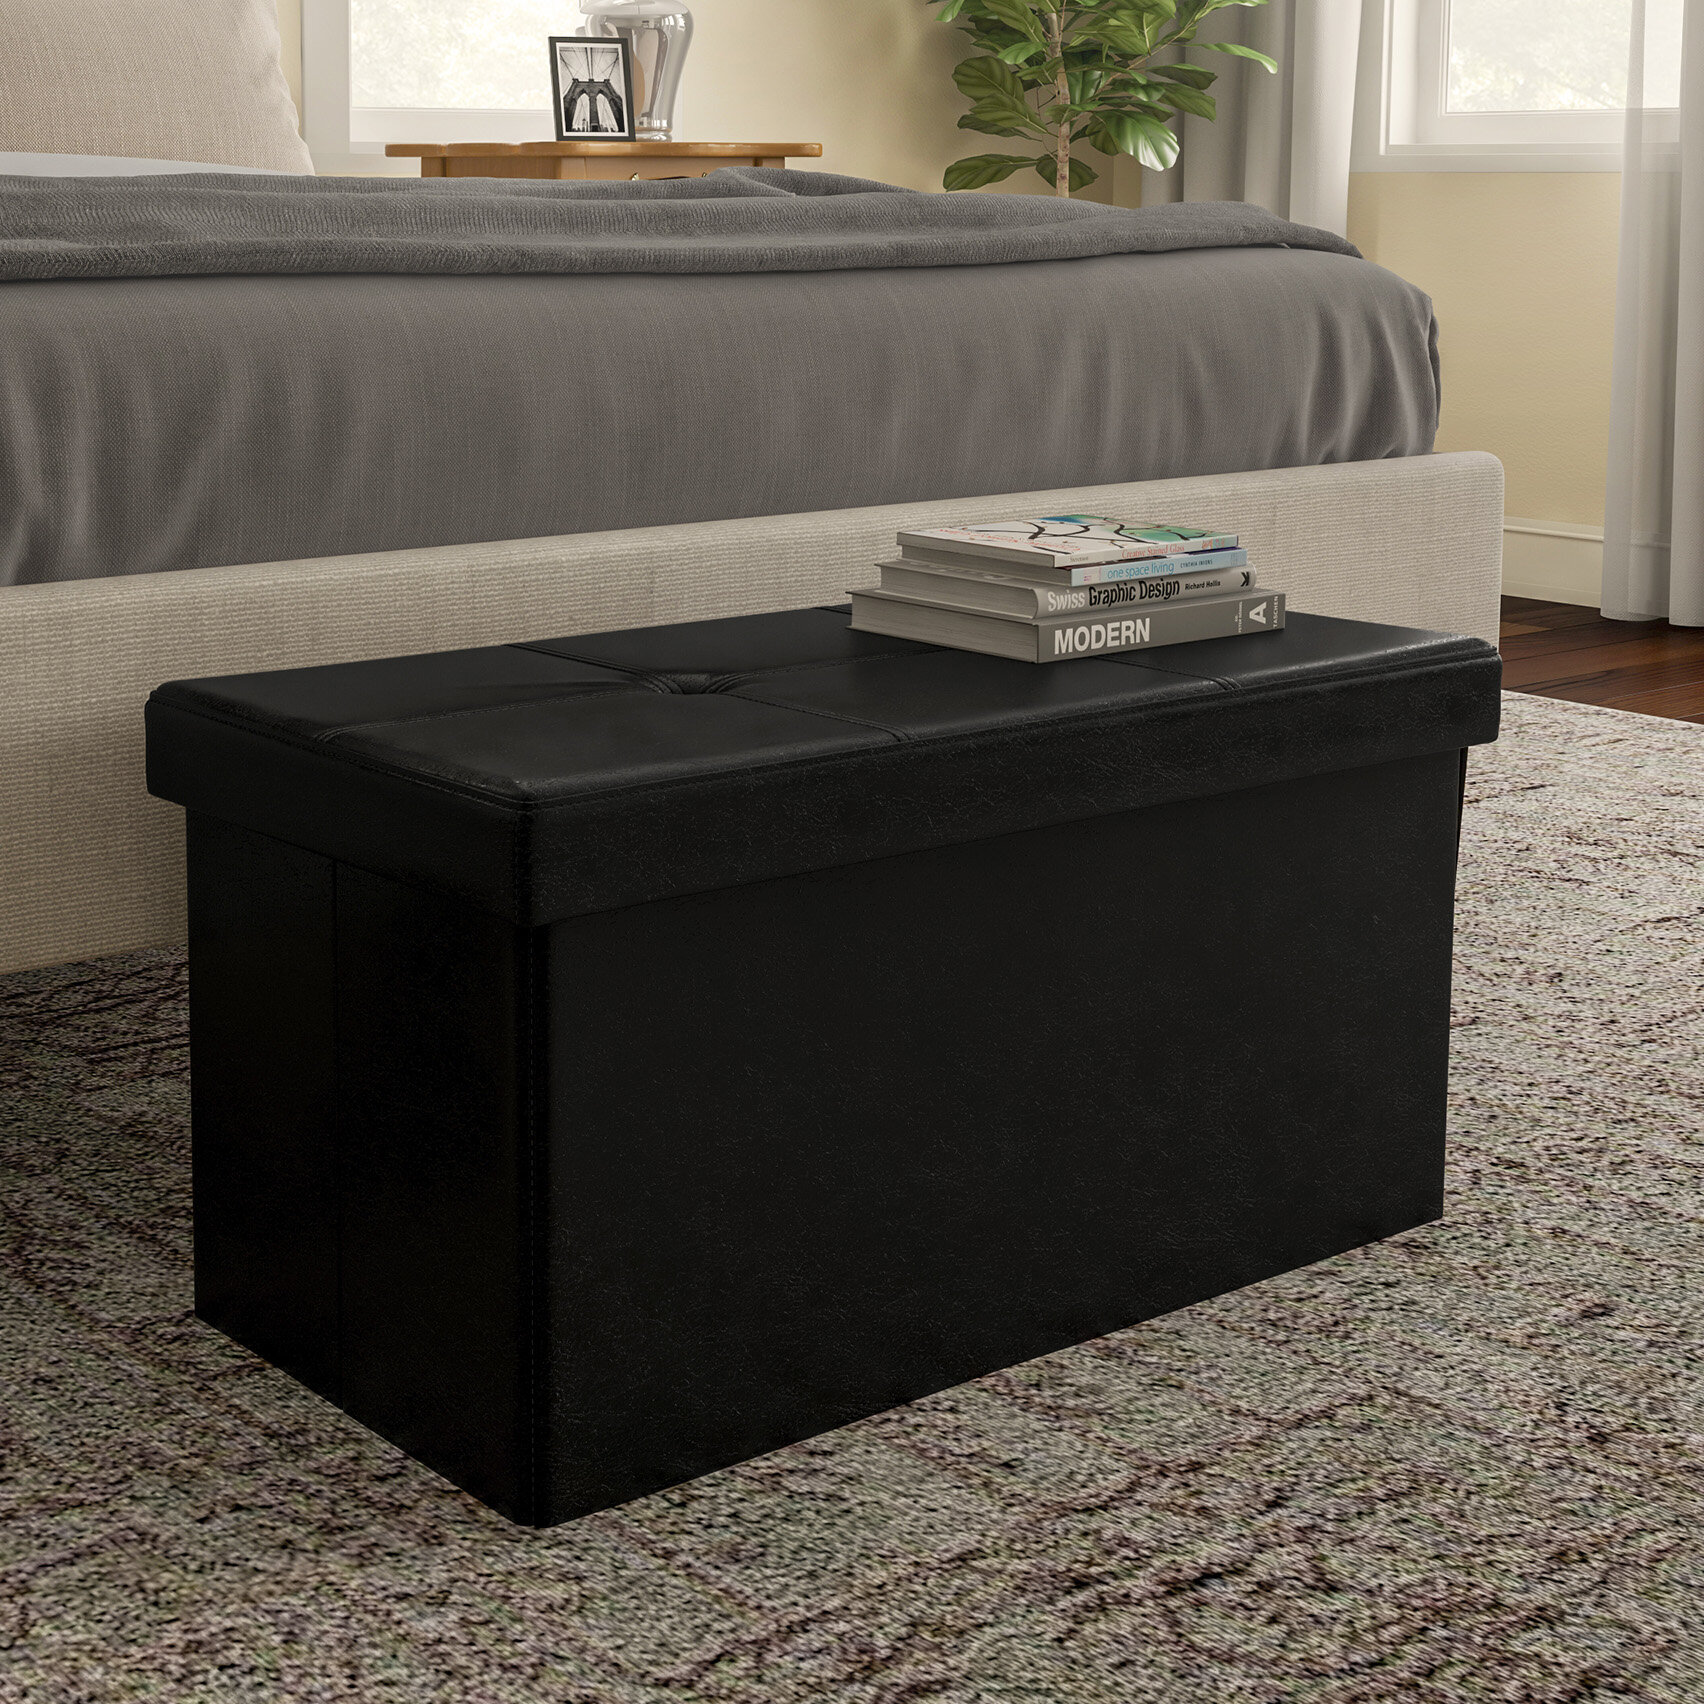 HOMCOM 15 Small Foot Stool Padded Ottoman with Wrinkle Fabric Design, Thick Sponge Padding and Solid Base, Gray